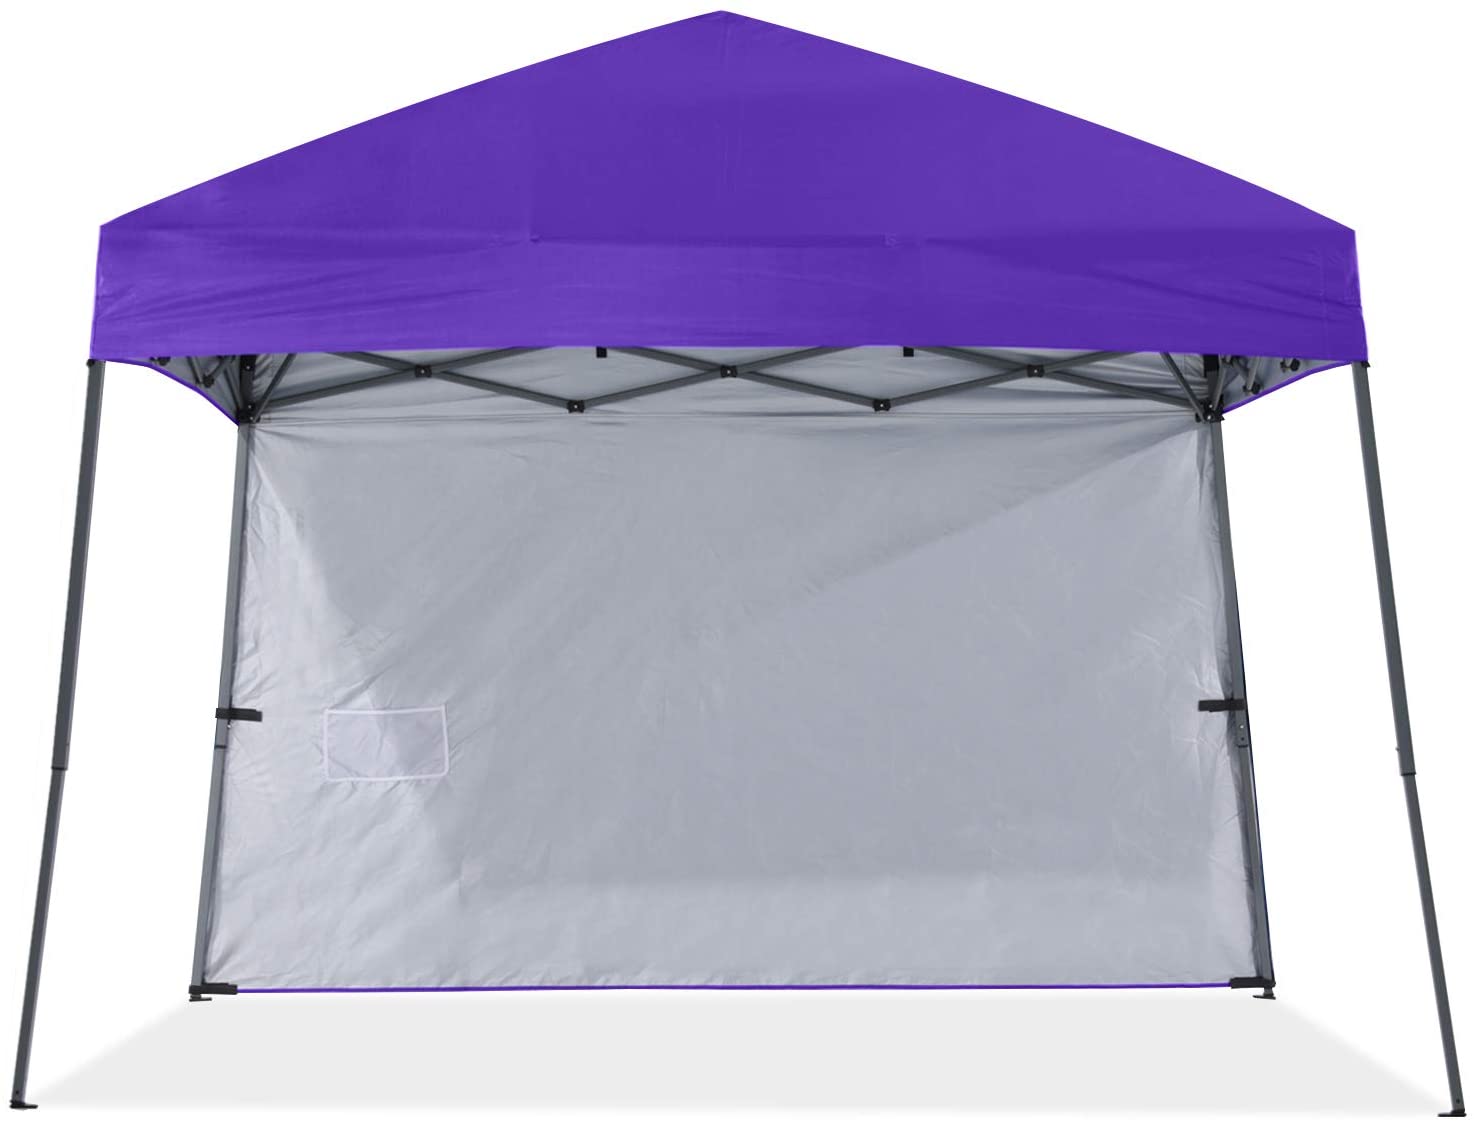 ABCCANOPY 10 ft x 10 ft Outdoor Pop up Slant Leg Canopy Tent with 1 Sun Wall and 1 Backpack Bag - Purple